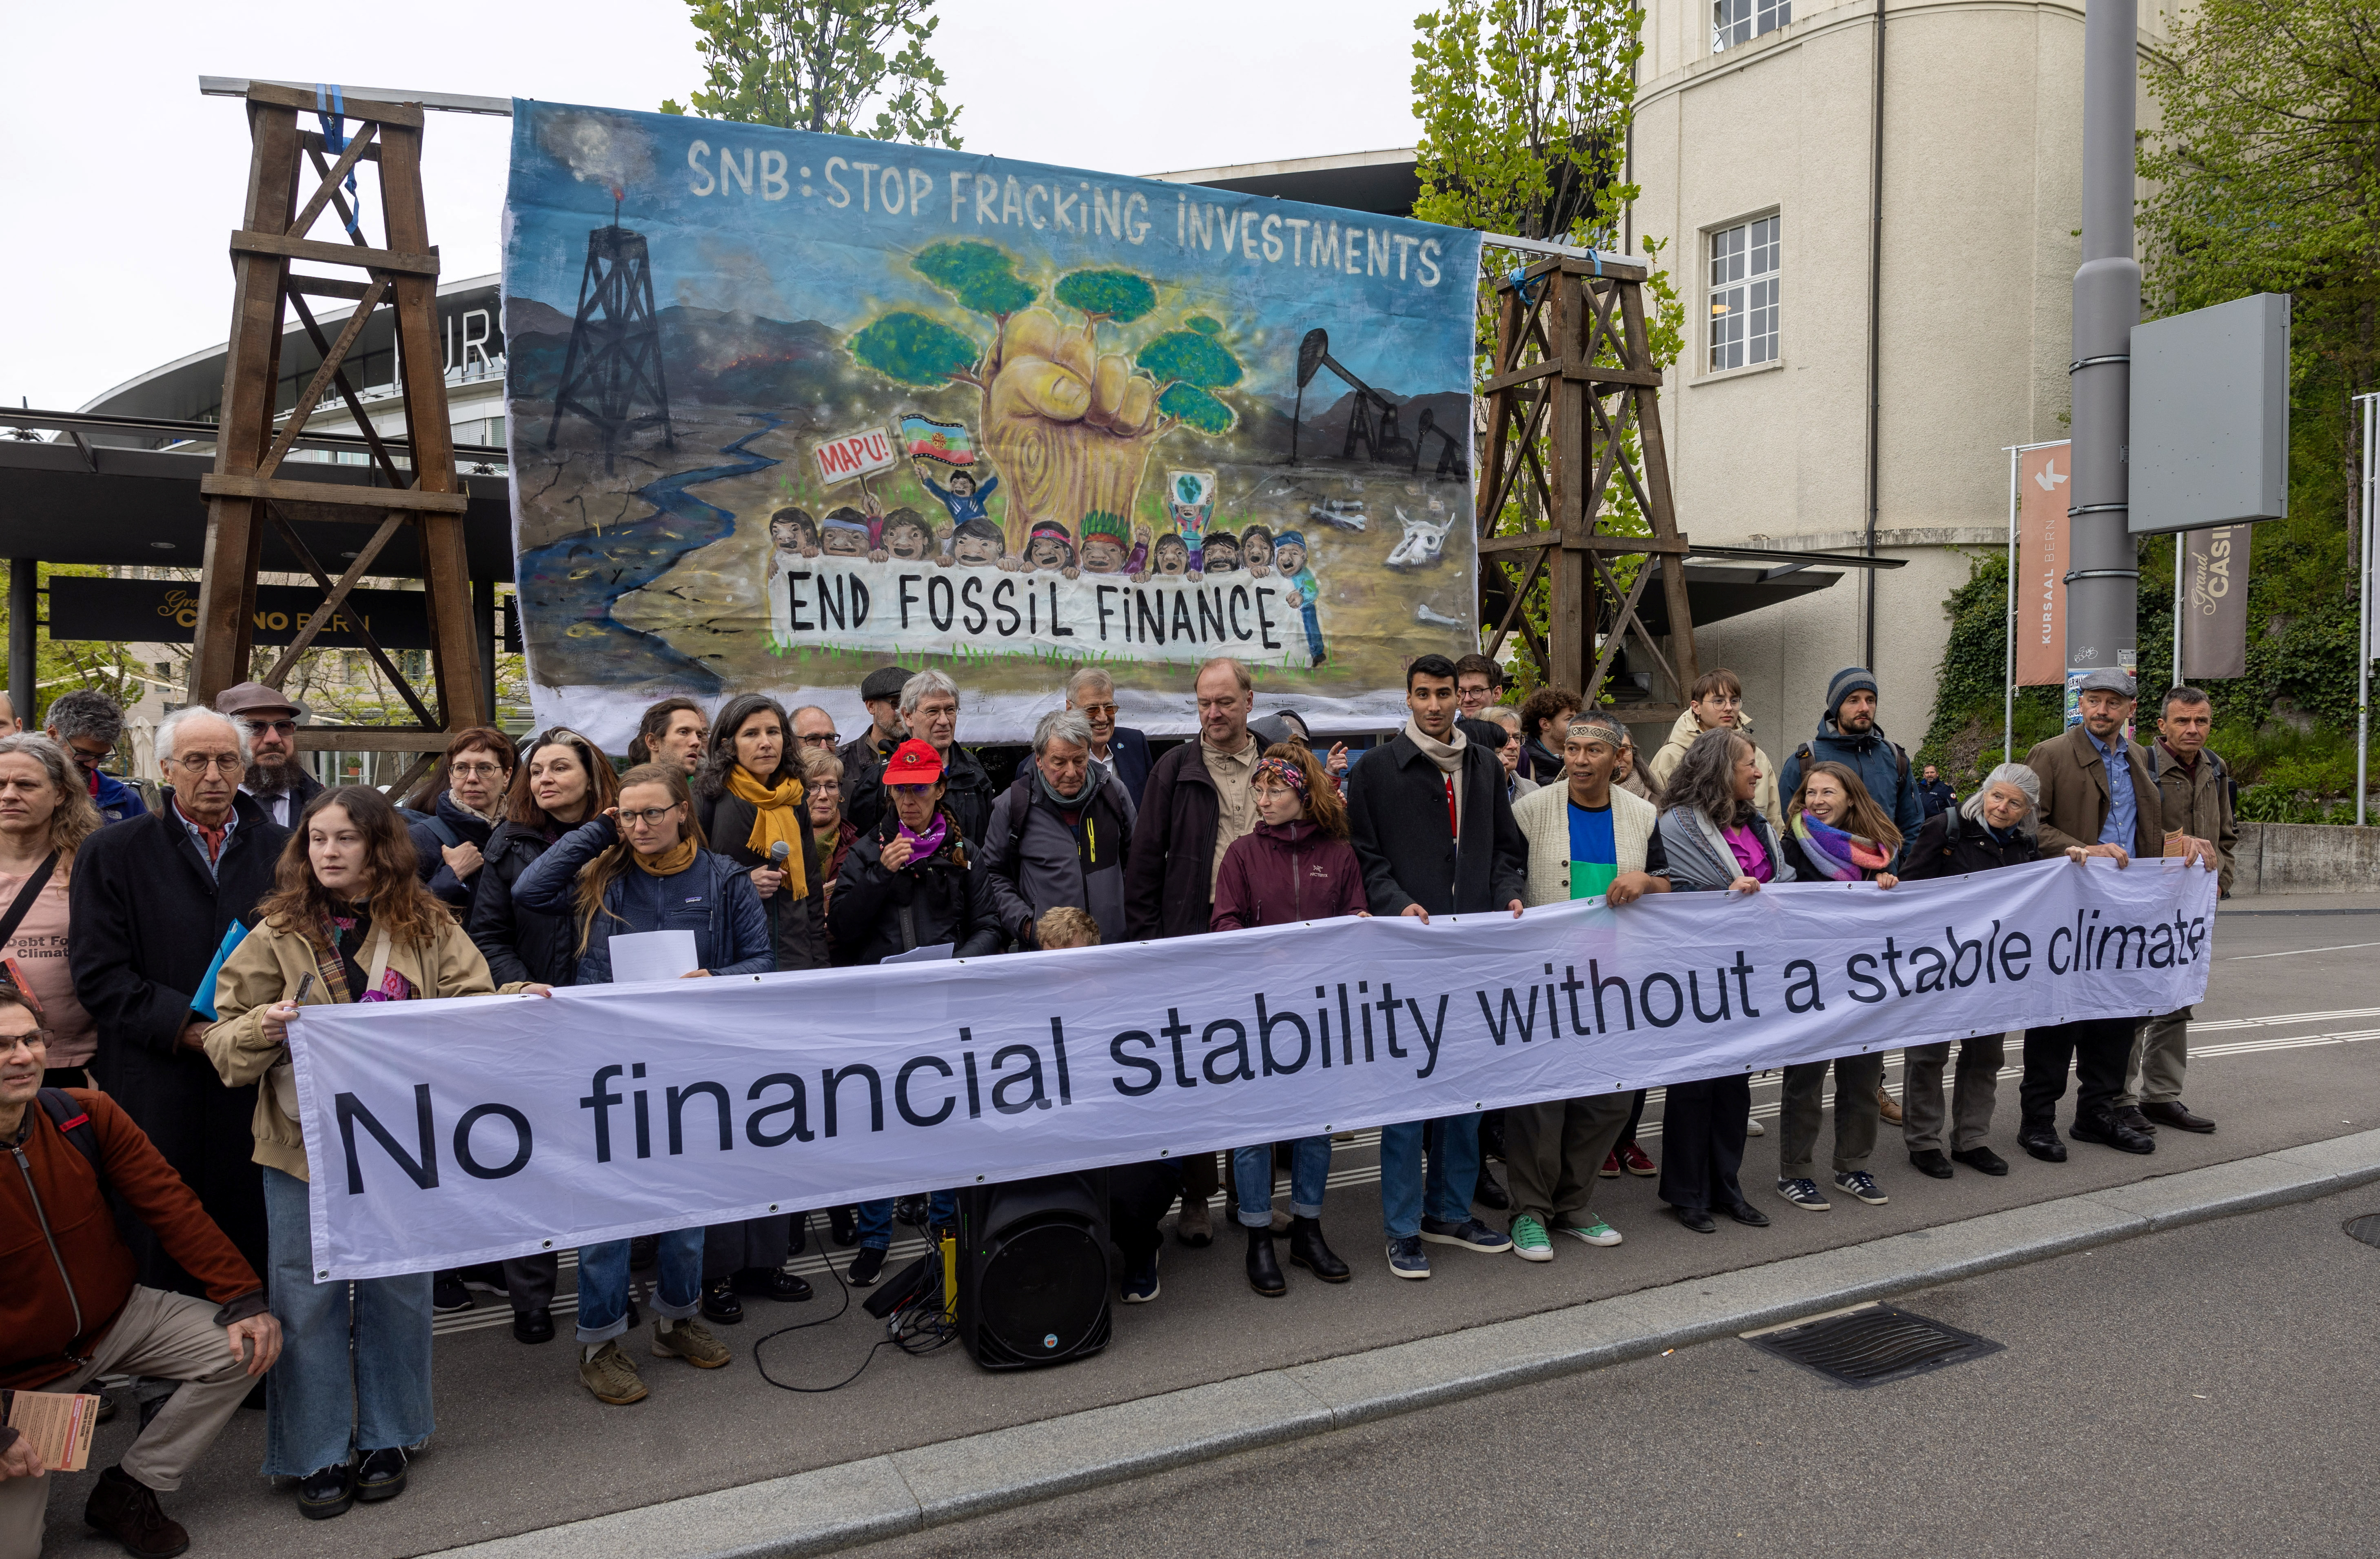 Activists protest against fossil investments before the annual general meeting of the Swiss National Bank (SNB) in Bern